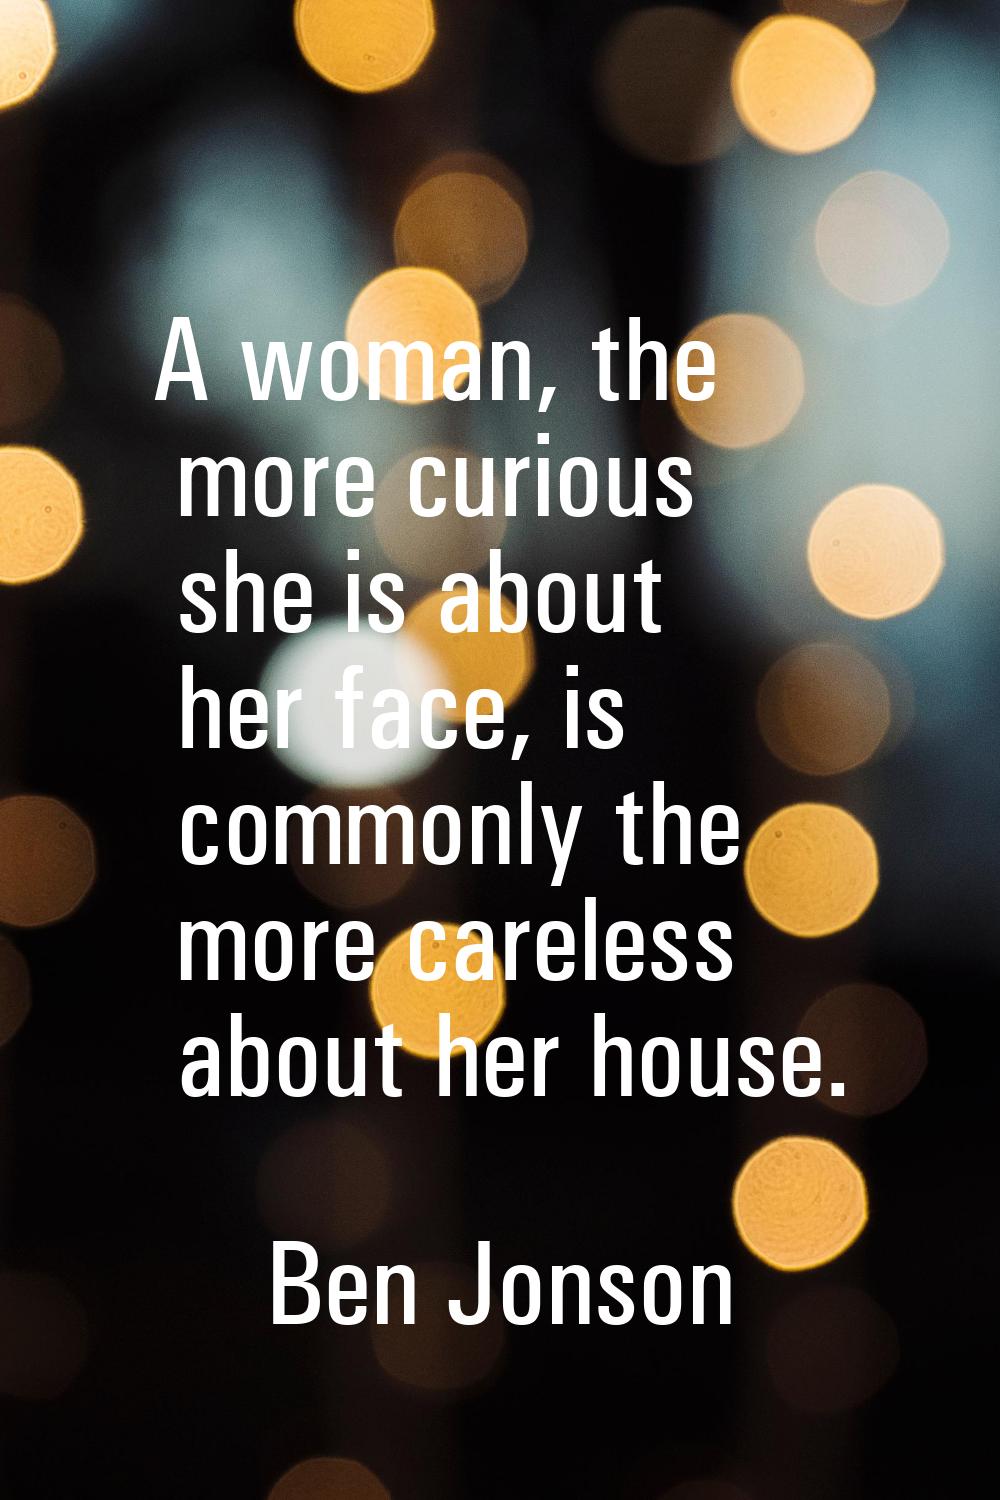 A woman, the more curious she is about her face, is commonly the more careless about her house.